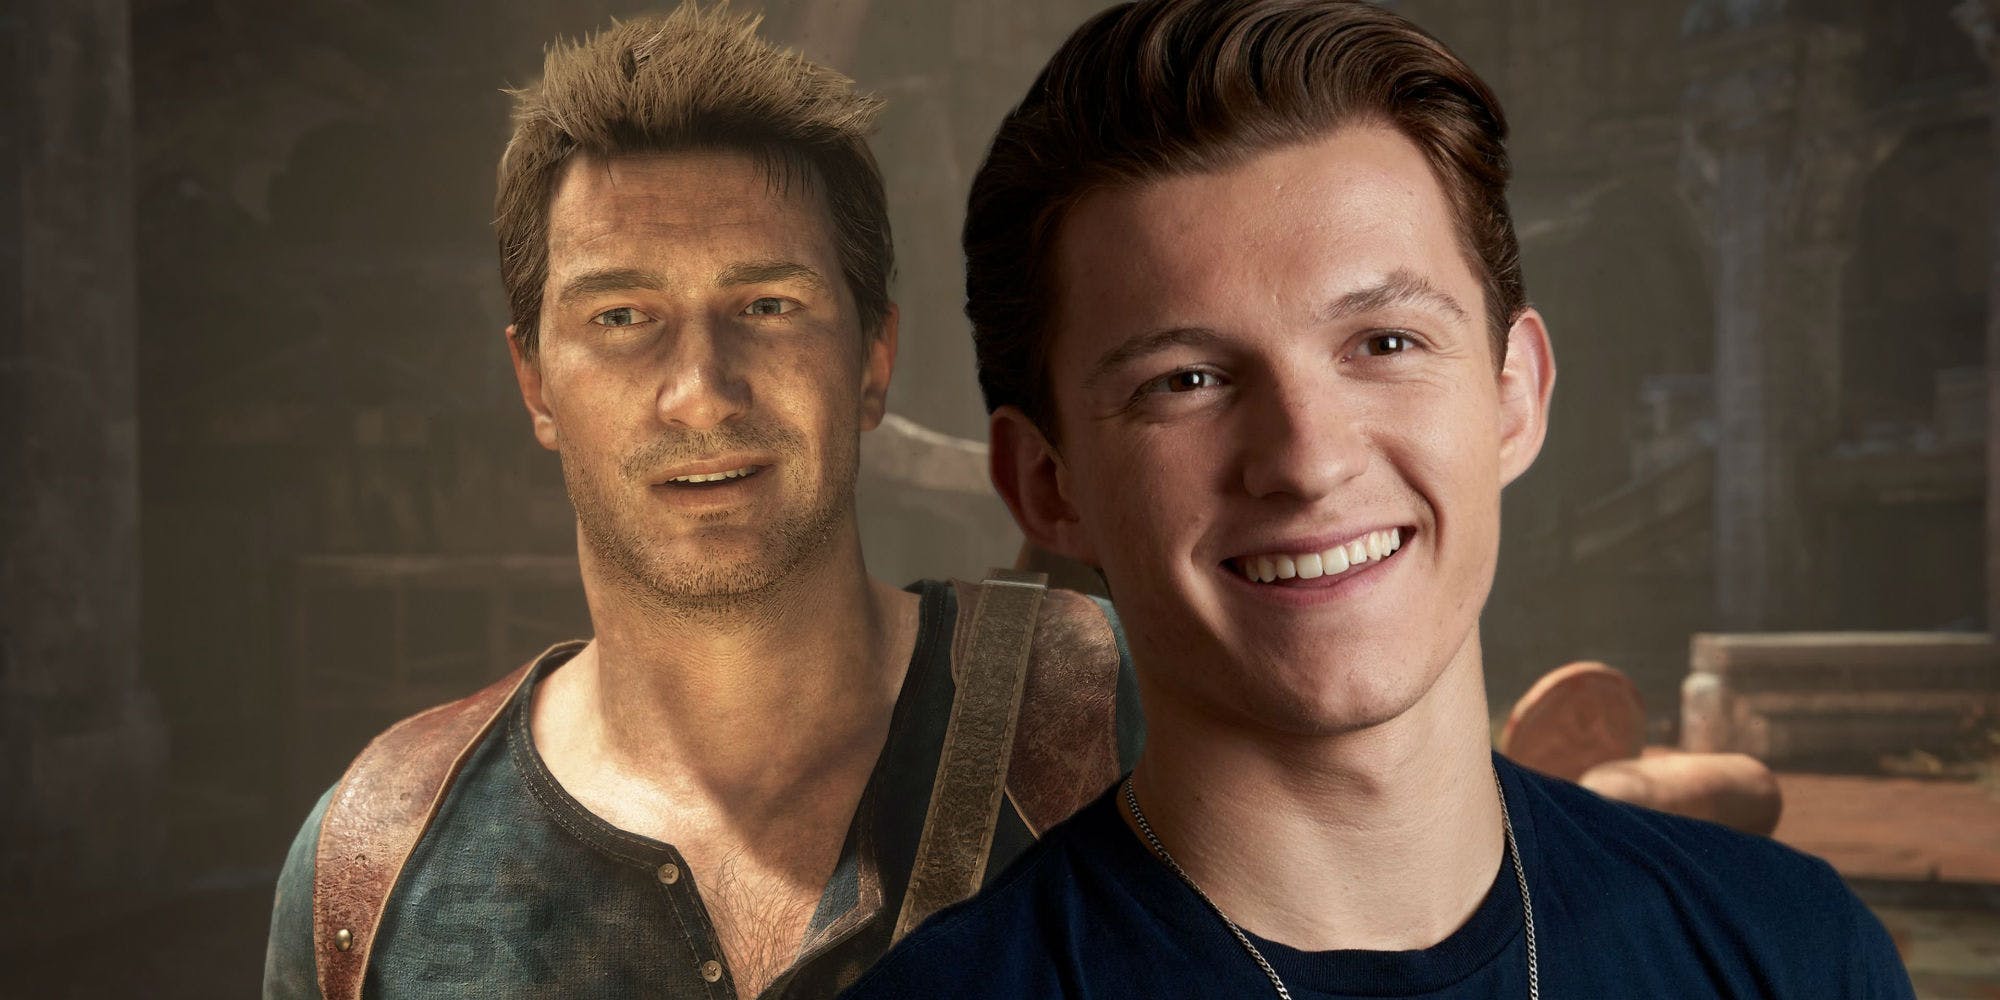 Tom Holland Loves The Latest Script Draft For Uncharted Movie